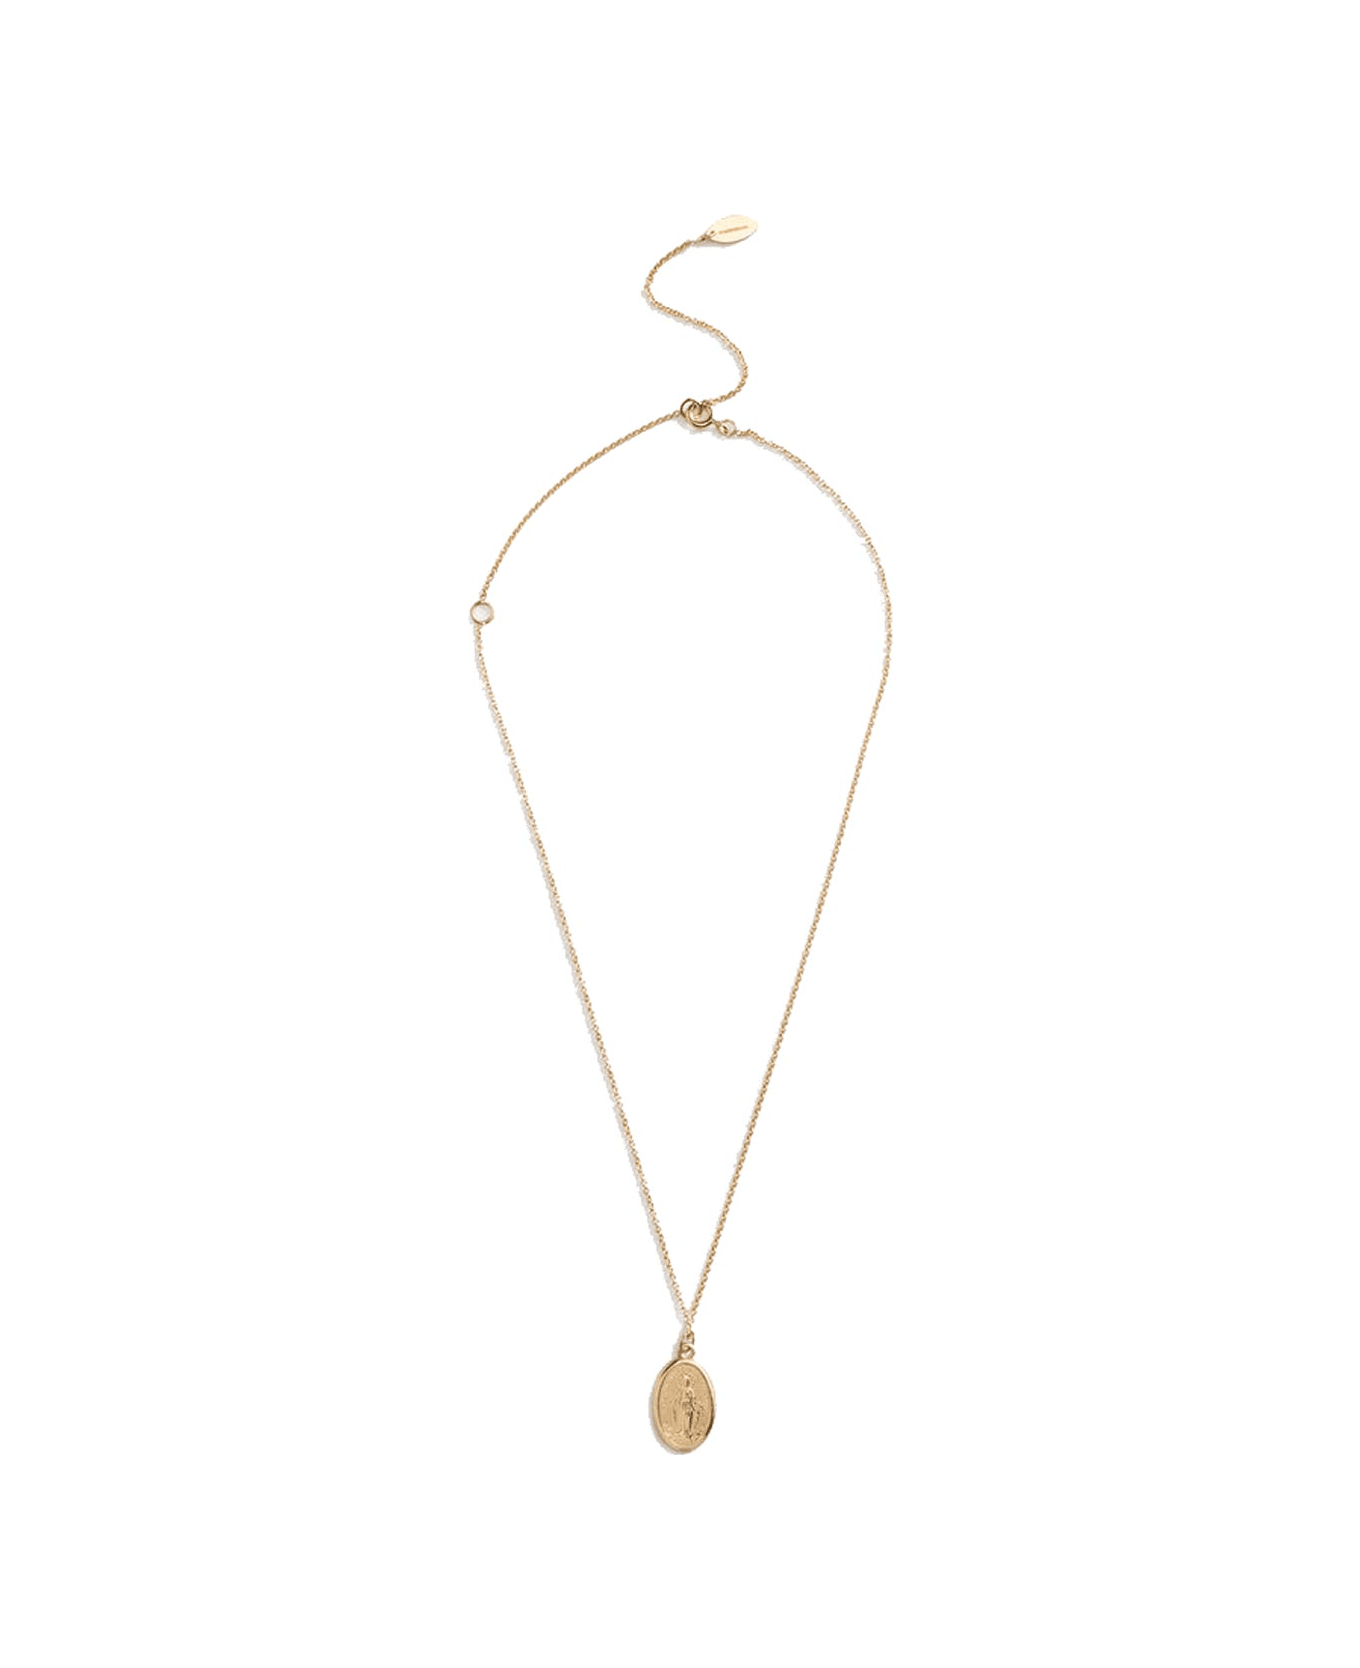 Dolce & Gabbana Necklace With Virgin Mary Medallion - Gold